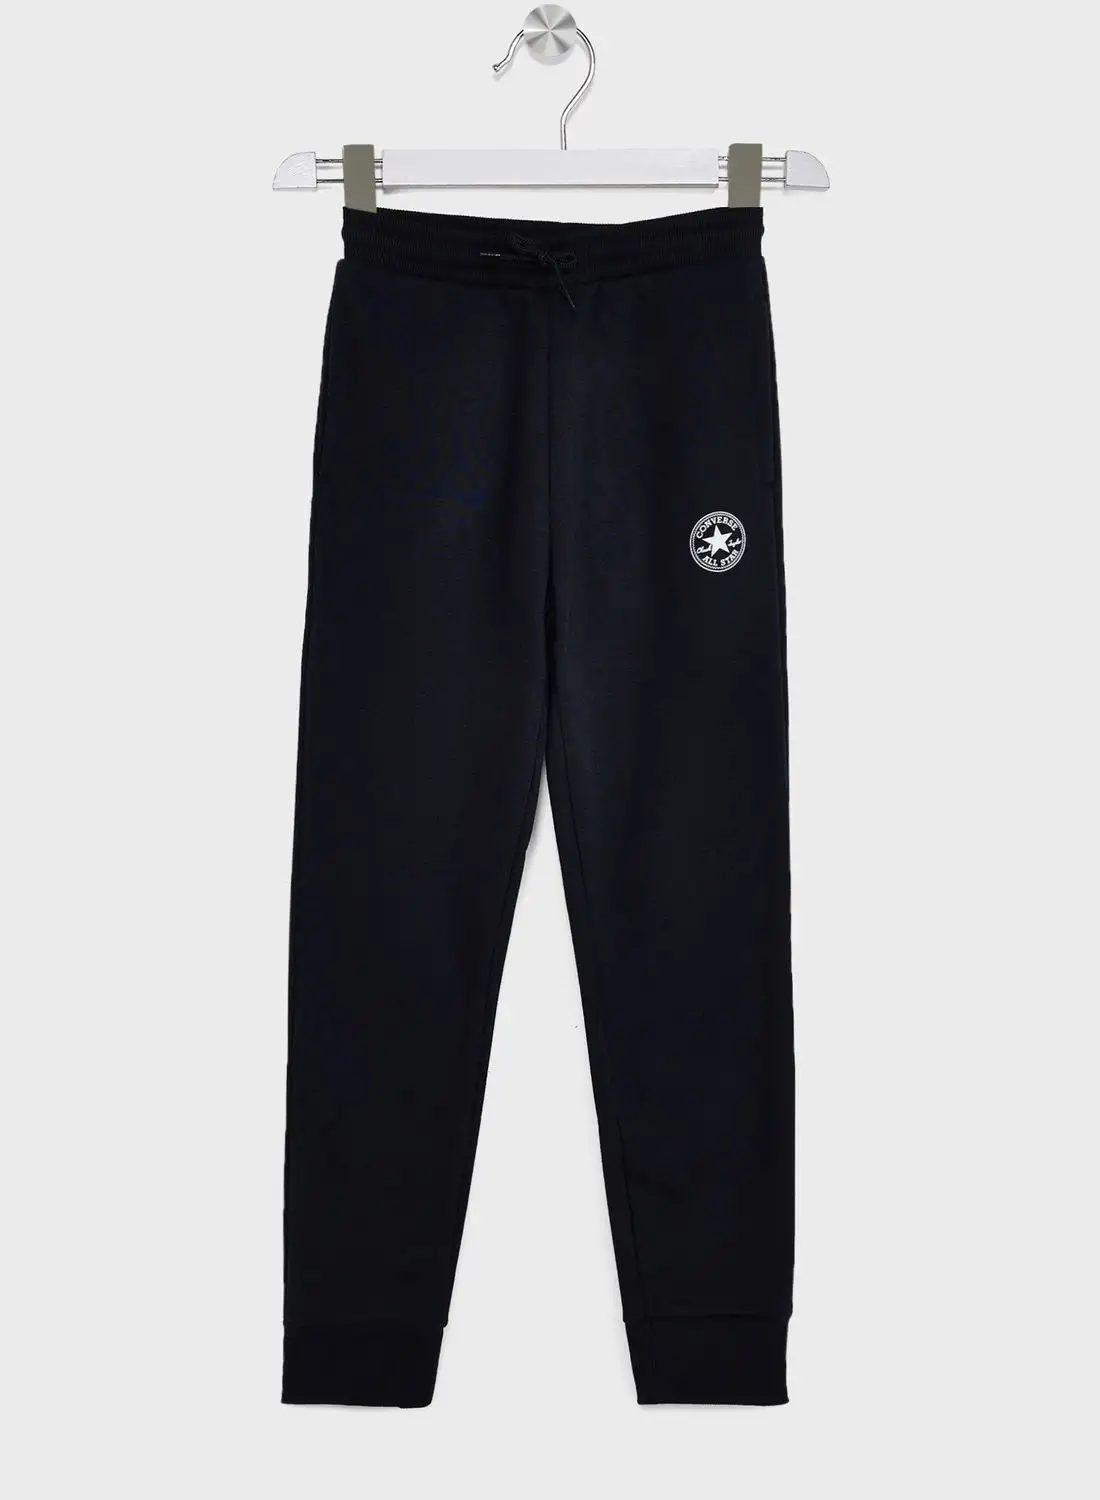 CONVERSE Youth Chuck Taylor Patch Sweatpants